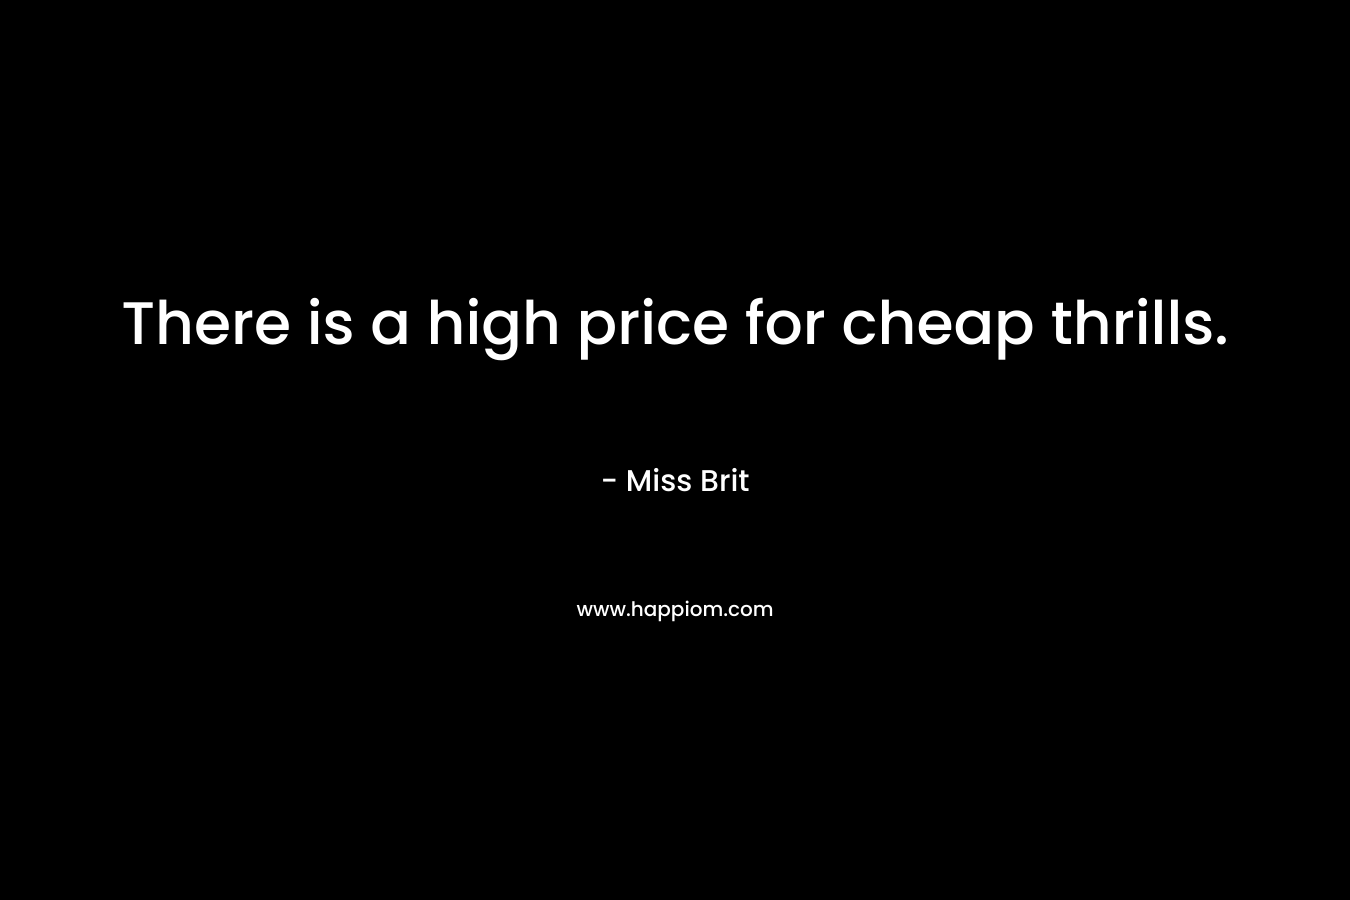 There is a high price for cheap thrills. – Miss Brit